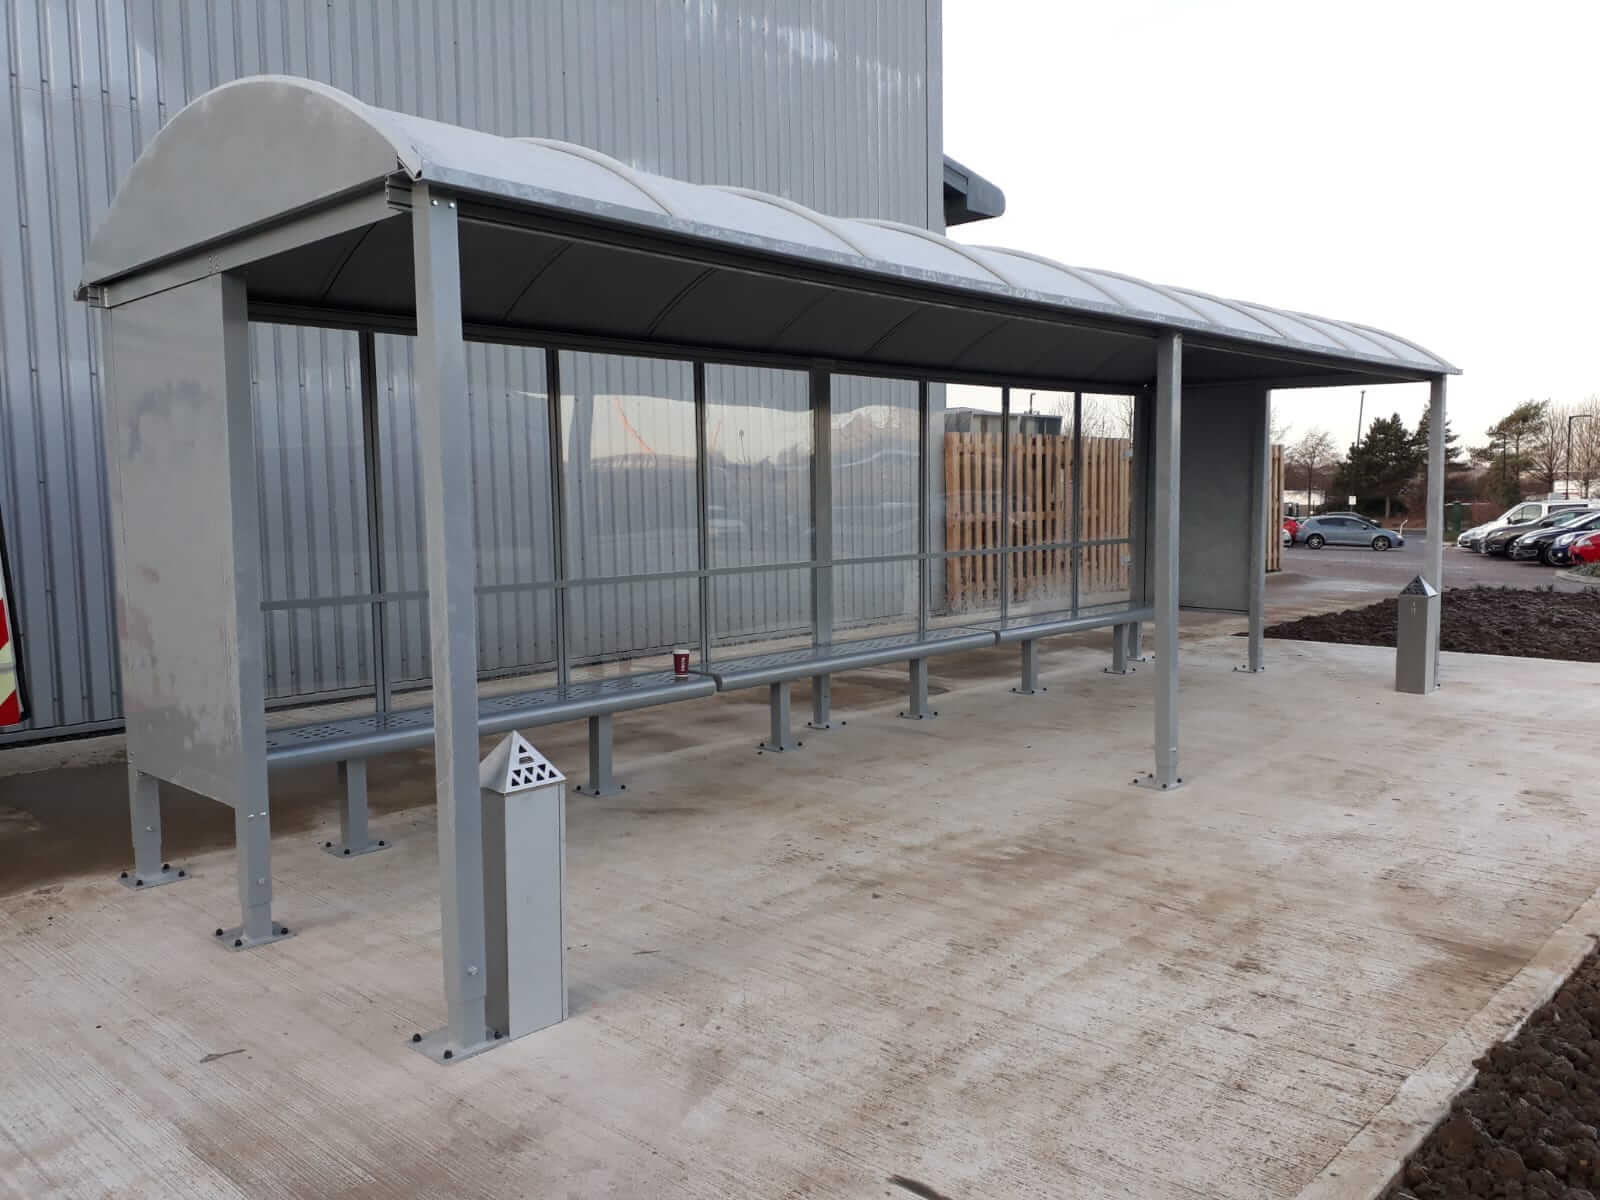 8Mtr Silver Smoking Shelter with aluminium bench seating and pyramid ashtrays